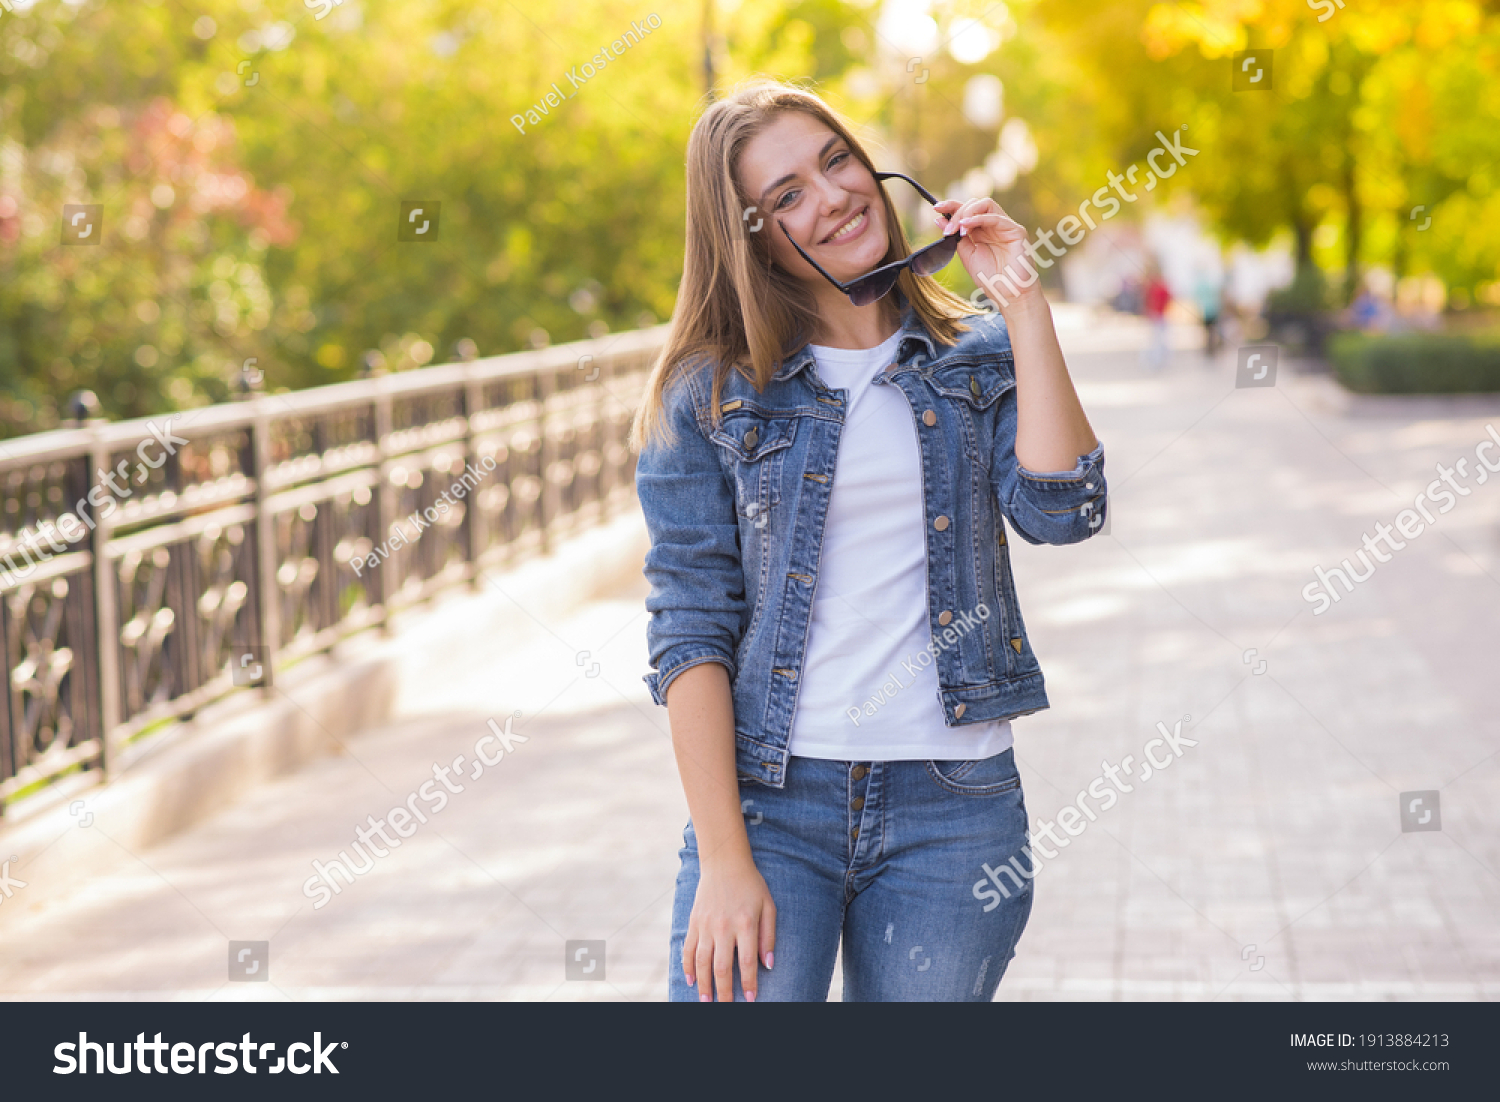 Portrait of a happy and attractive blonde Caucasian young woman in a casual denim jacket outdoors in a park on a sunny autumn day. A concept of lifestyle, happiness and joy. #1913884213